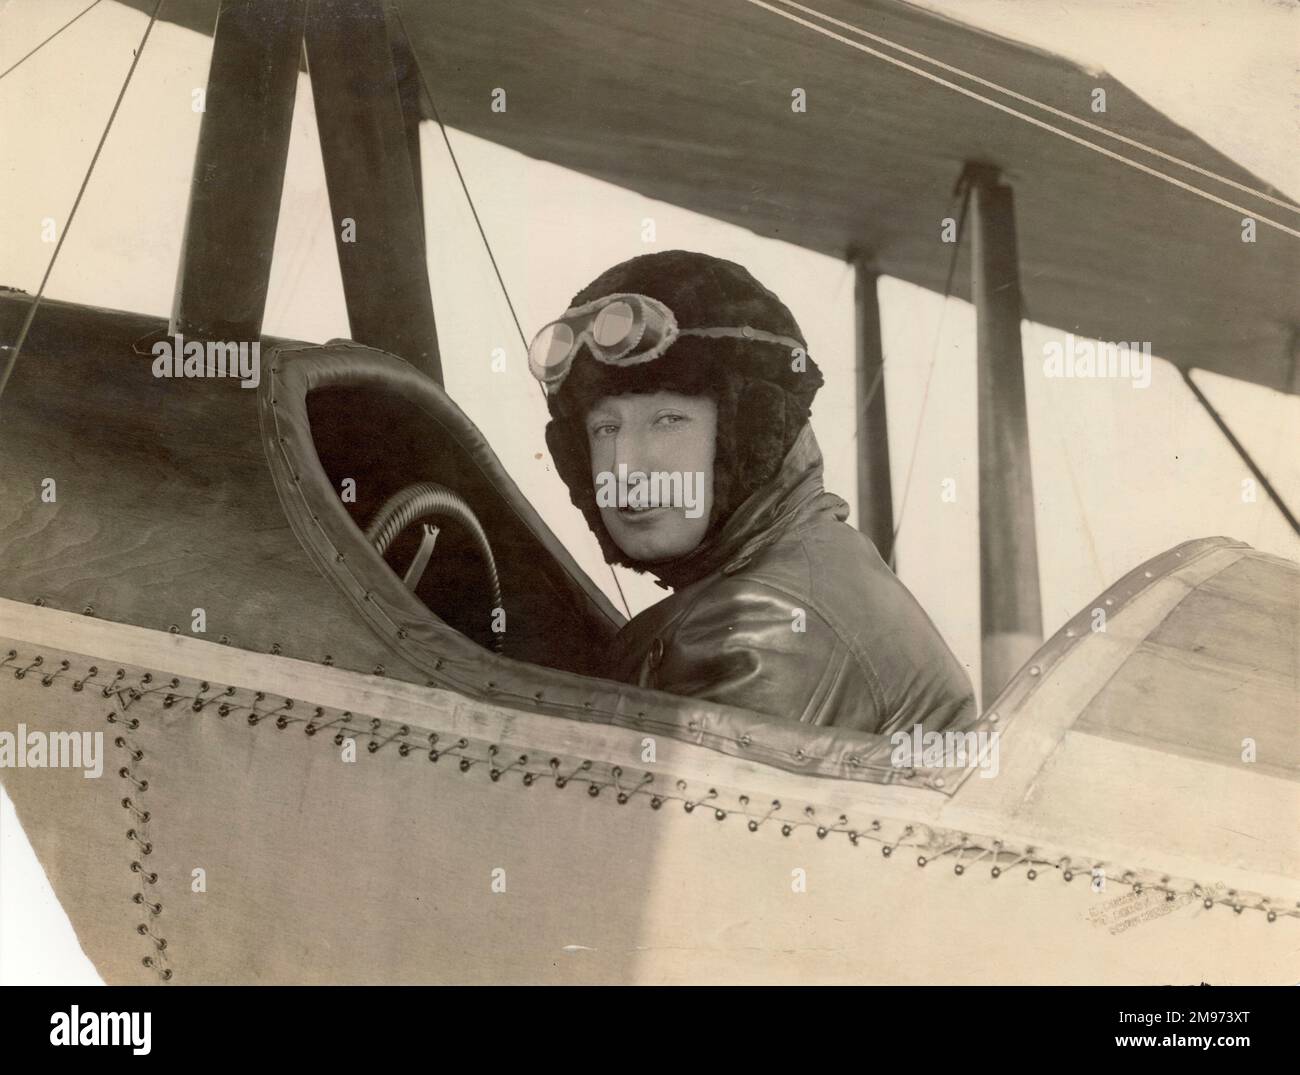 William Rowland Ding, 1885-1917, chief test pilot for Blackburn Aircraft. He is shown here sitting in the cockpit of a modified Handley Page G in 1914. Stock Photo